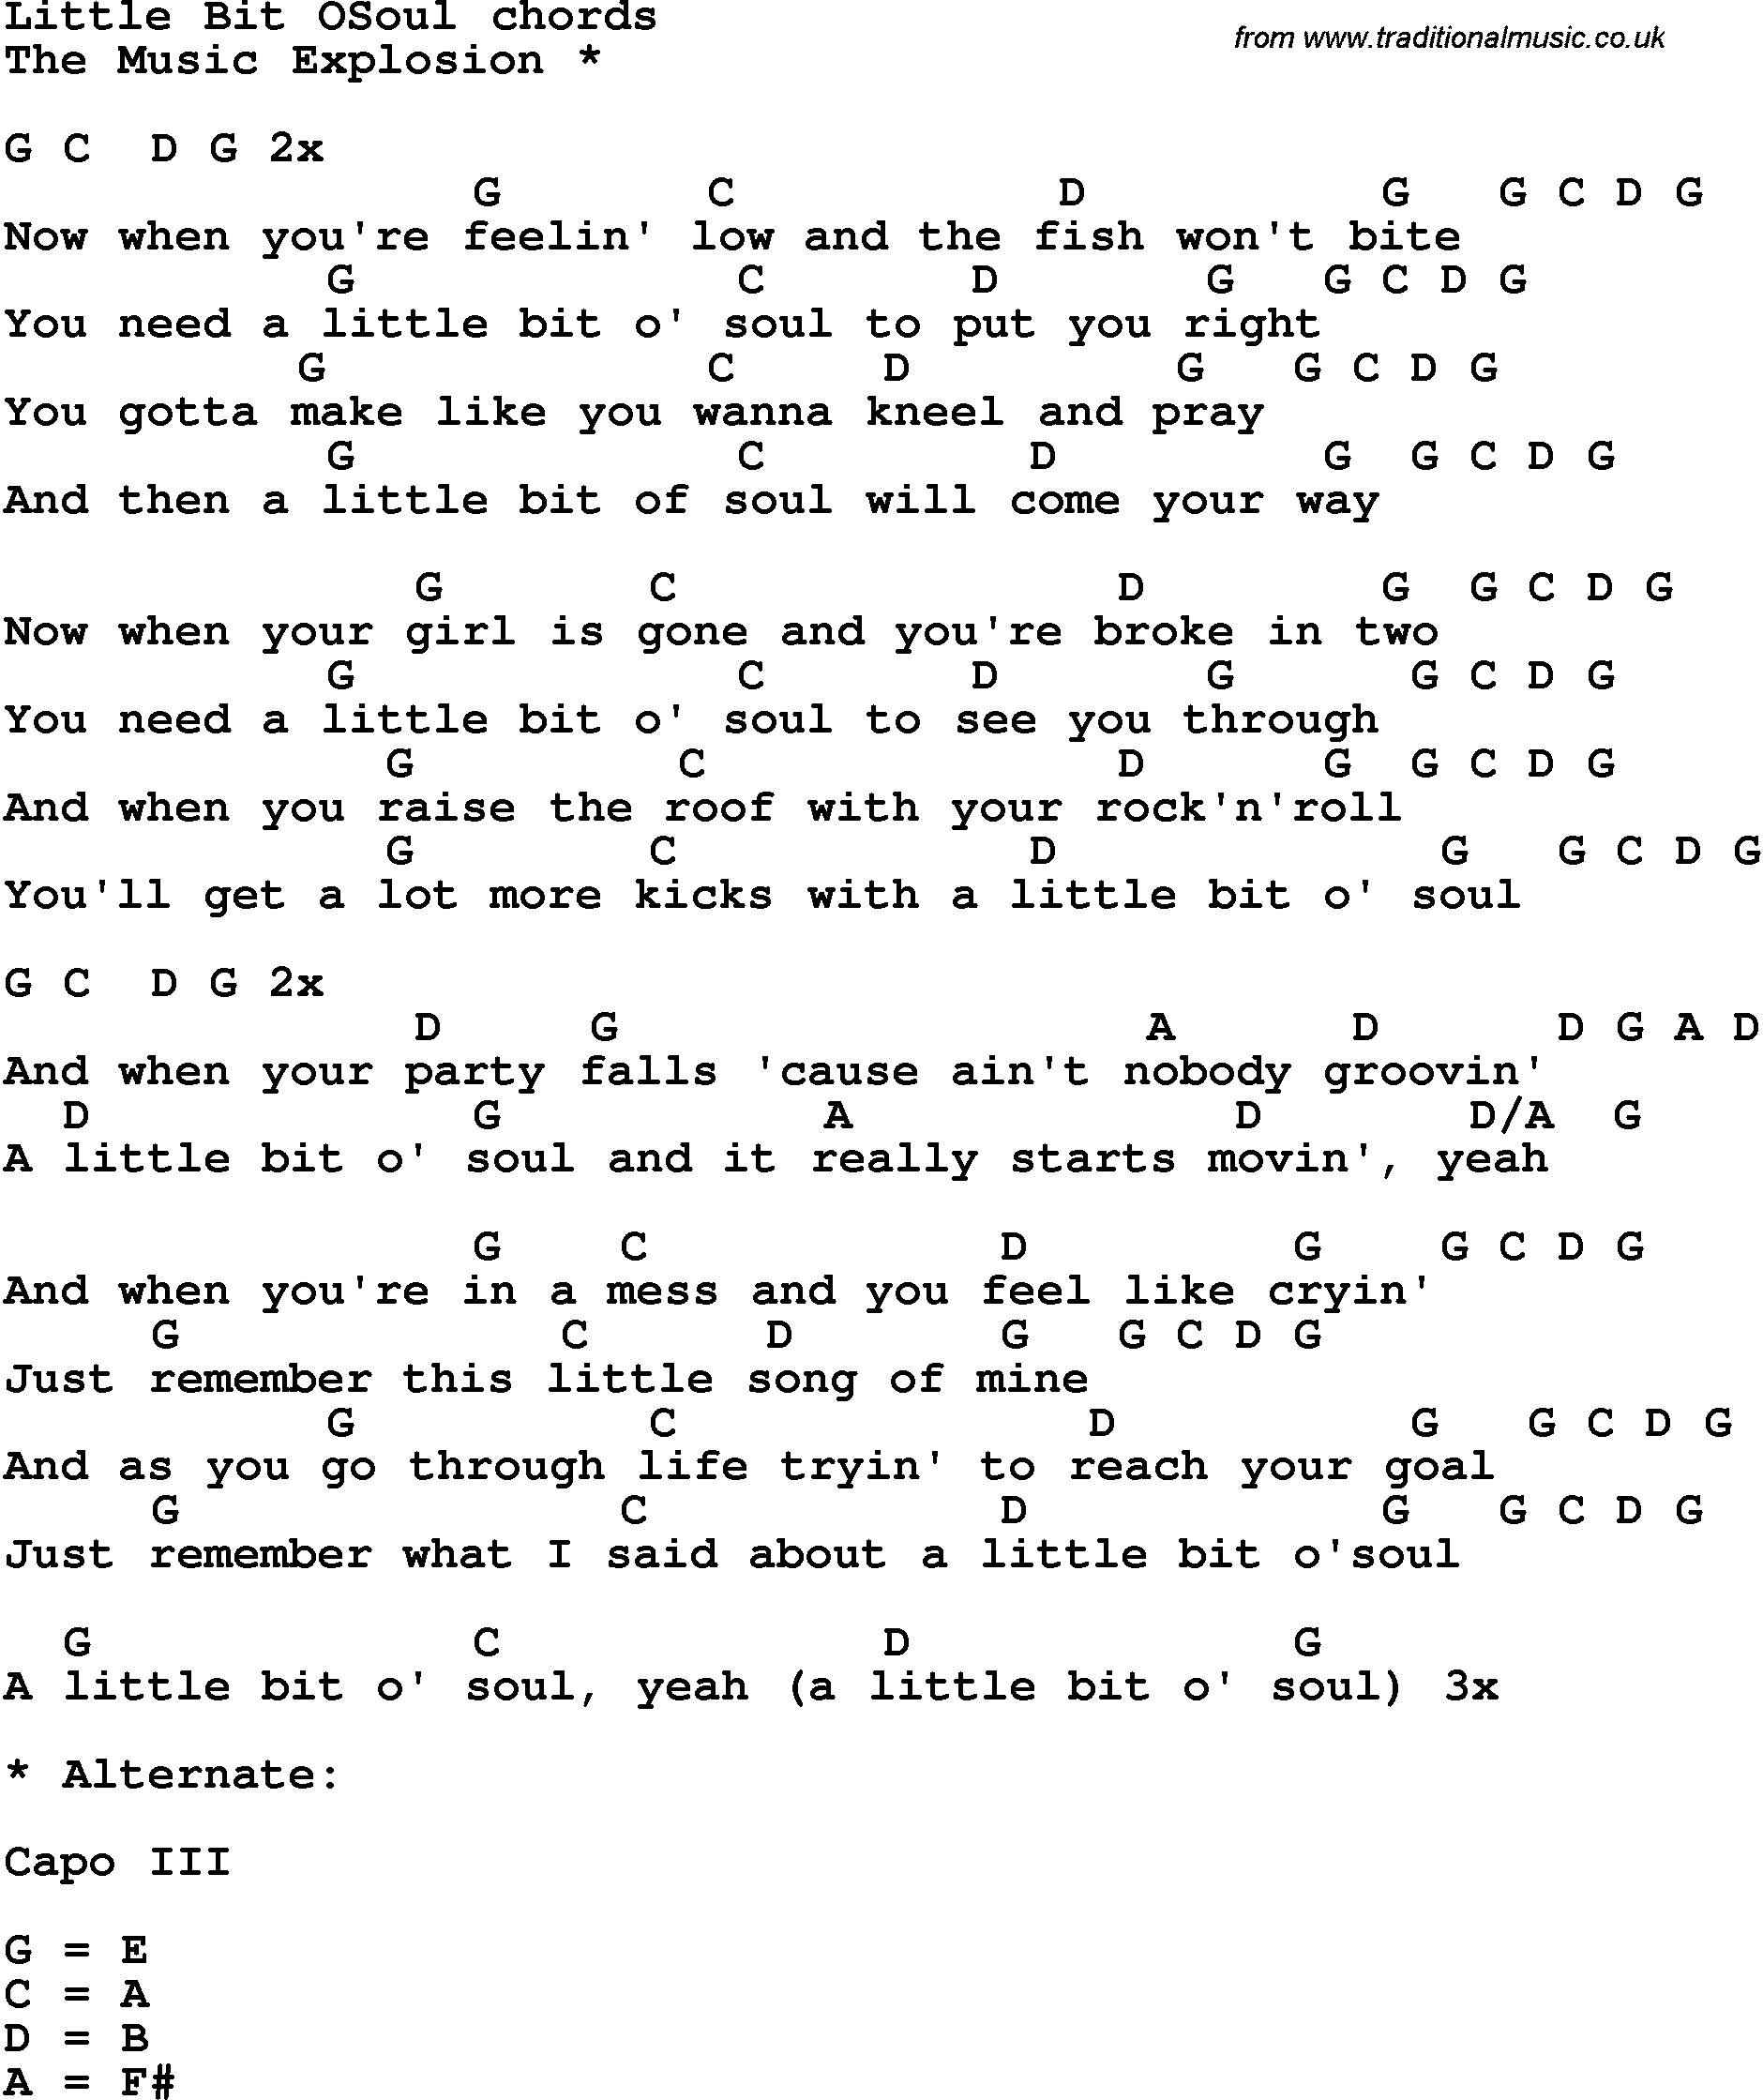 Song Lyrics with guitar chords for Little Bit O' Soul